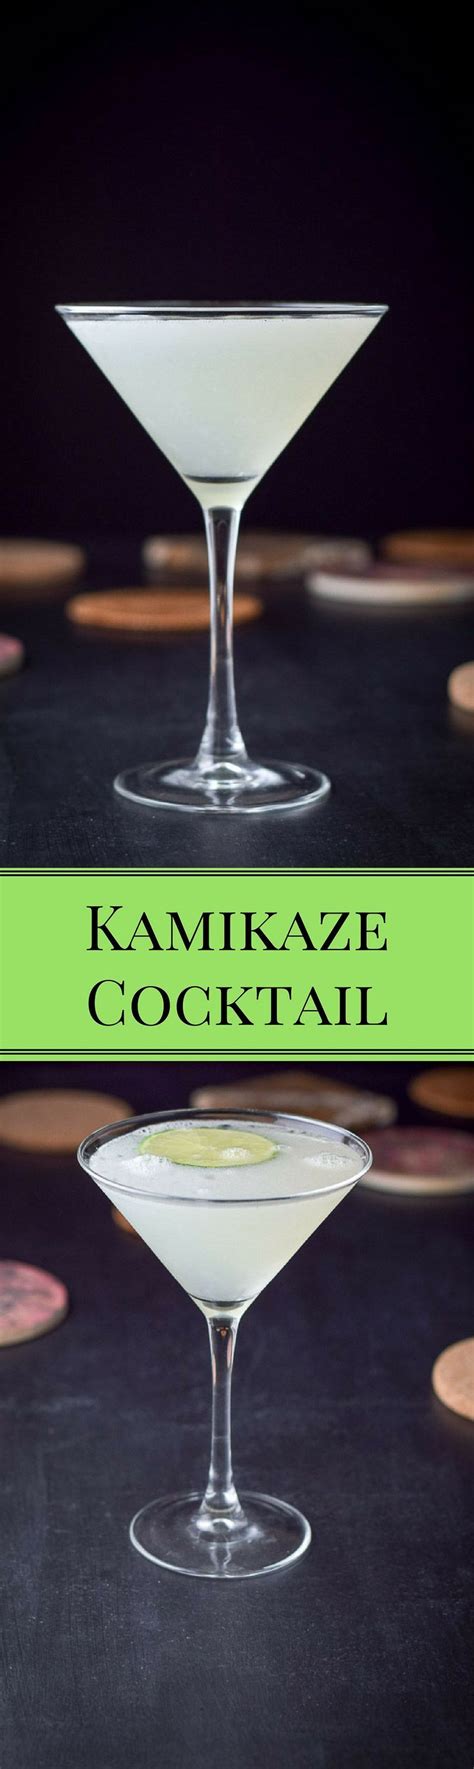 the kamikaze cocktail 3 ingredients in equal proportions but although it is easy it doesn